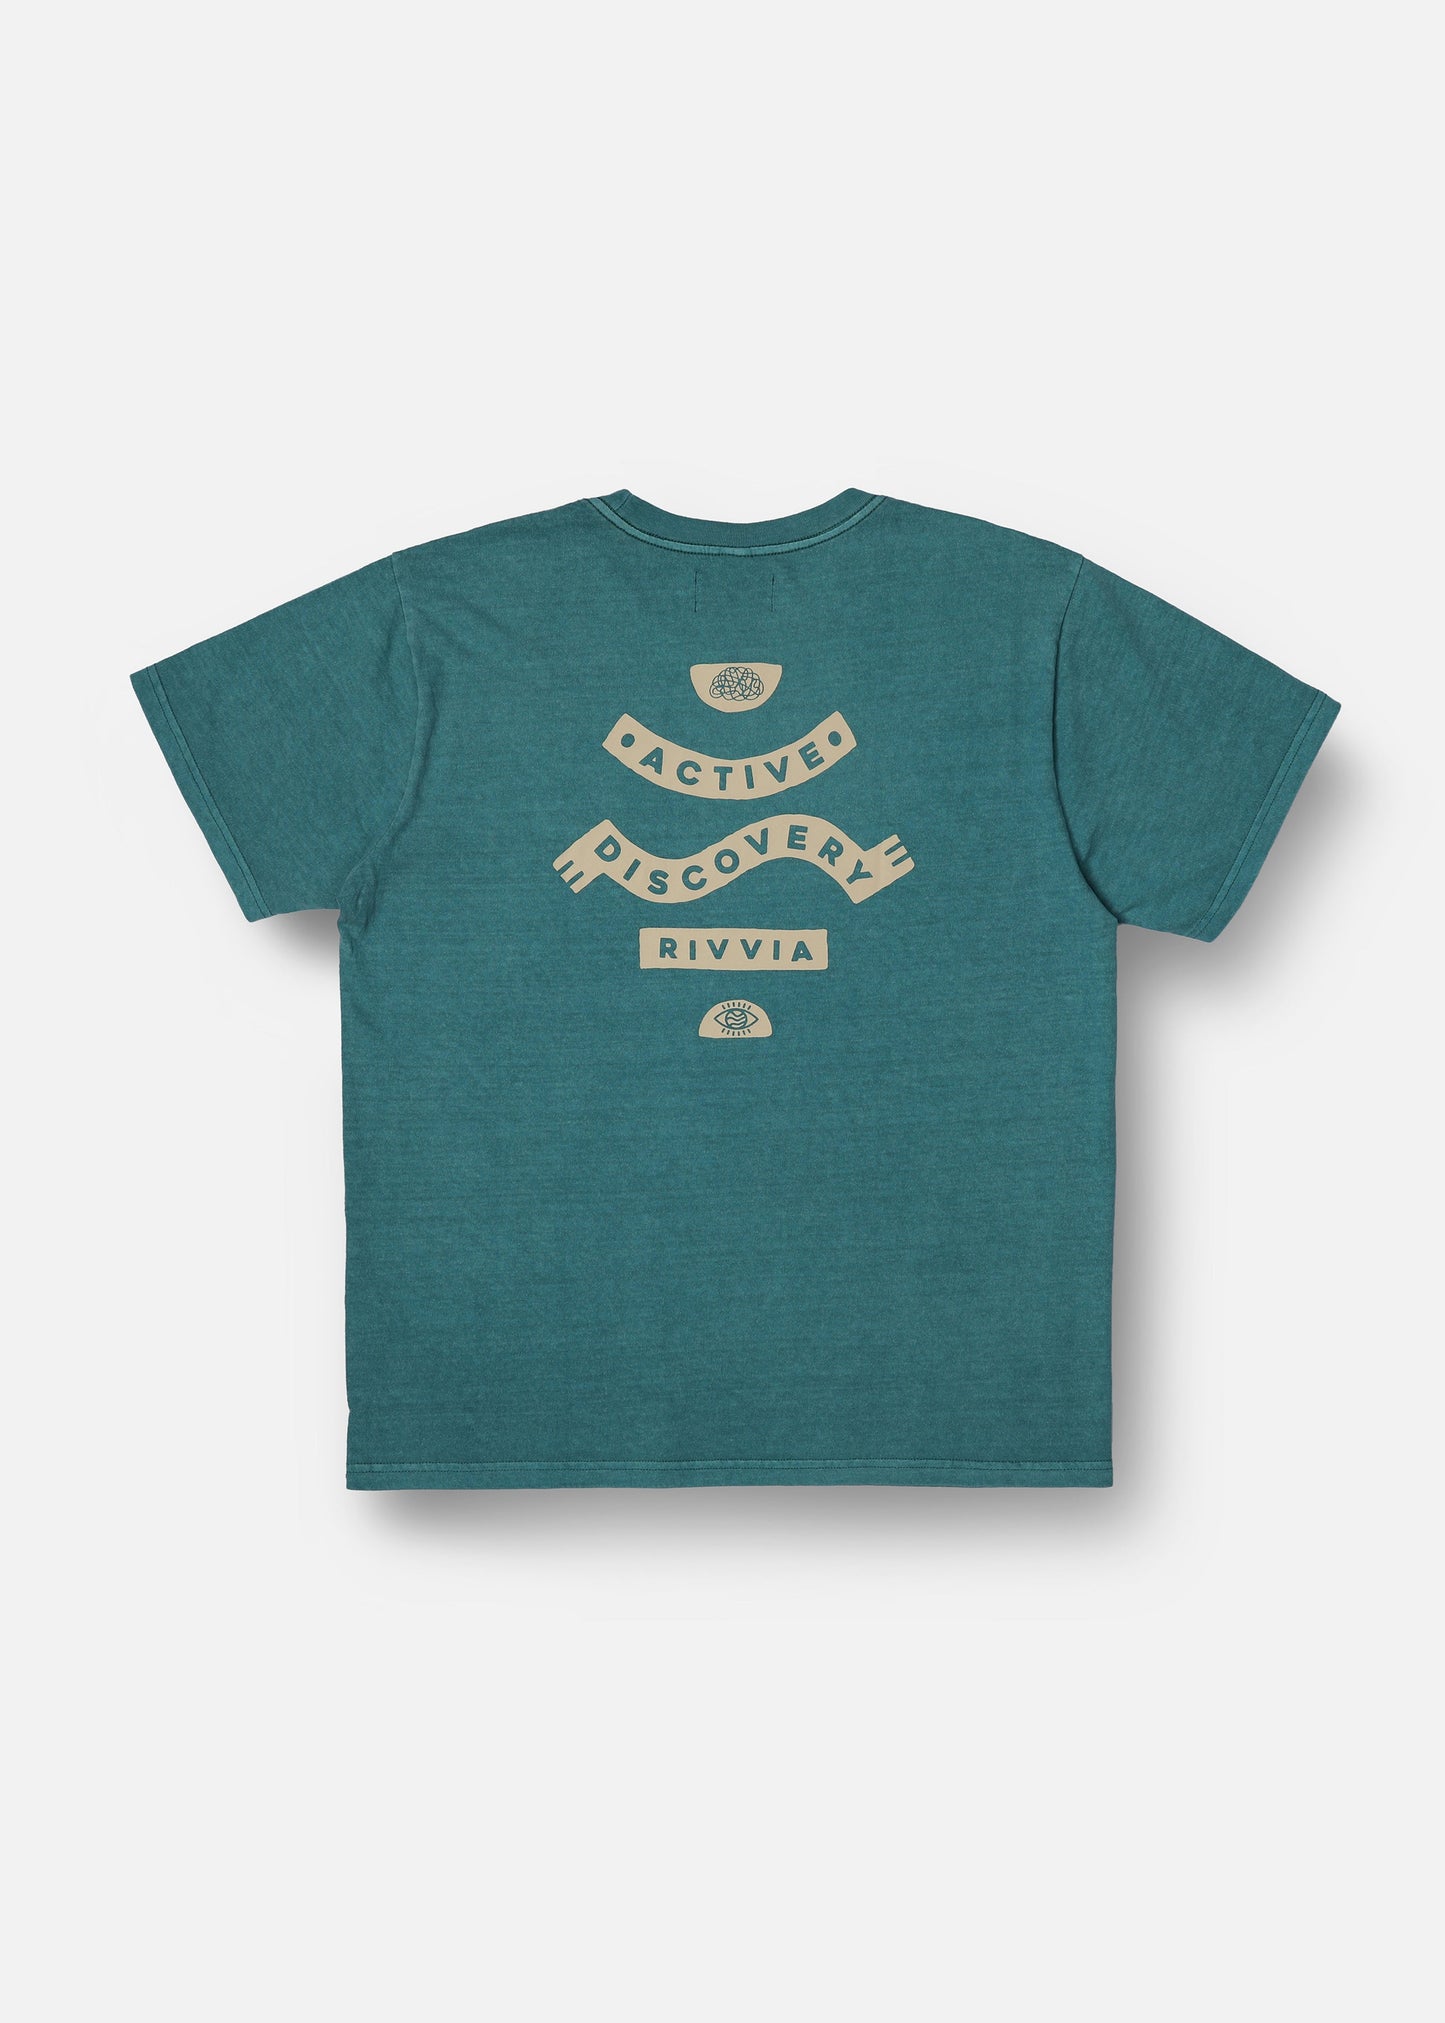 FOUNDATIONS T-SHIRT : TEAL